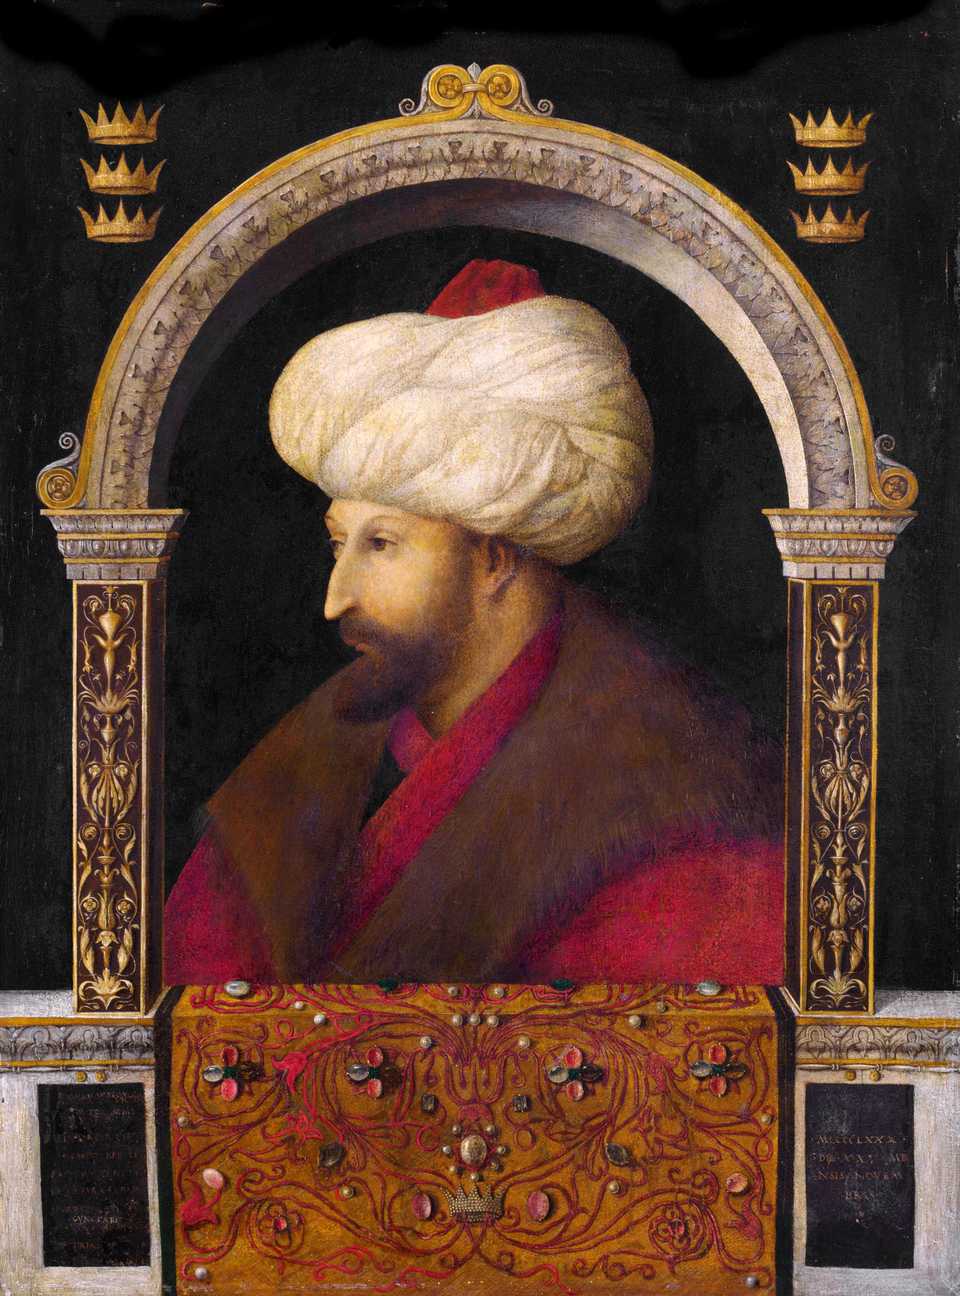 Not for sale: The portrait of Ottoman Sultan Mehmed the Conqueror by Italian painter Gentile Bellini, 1480, the National Gallery, London, UK.